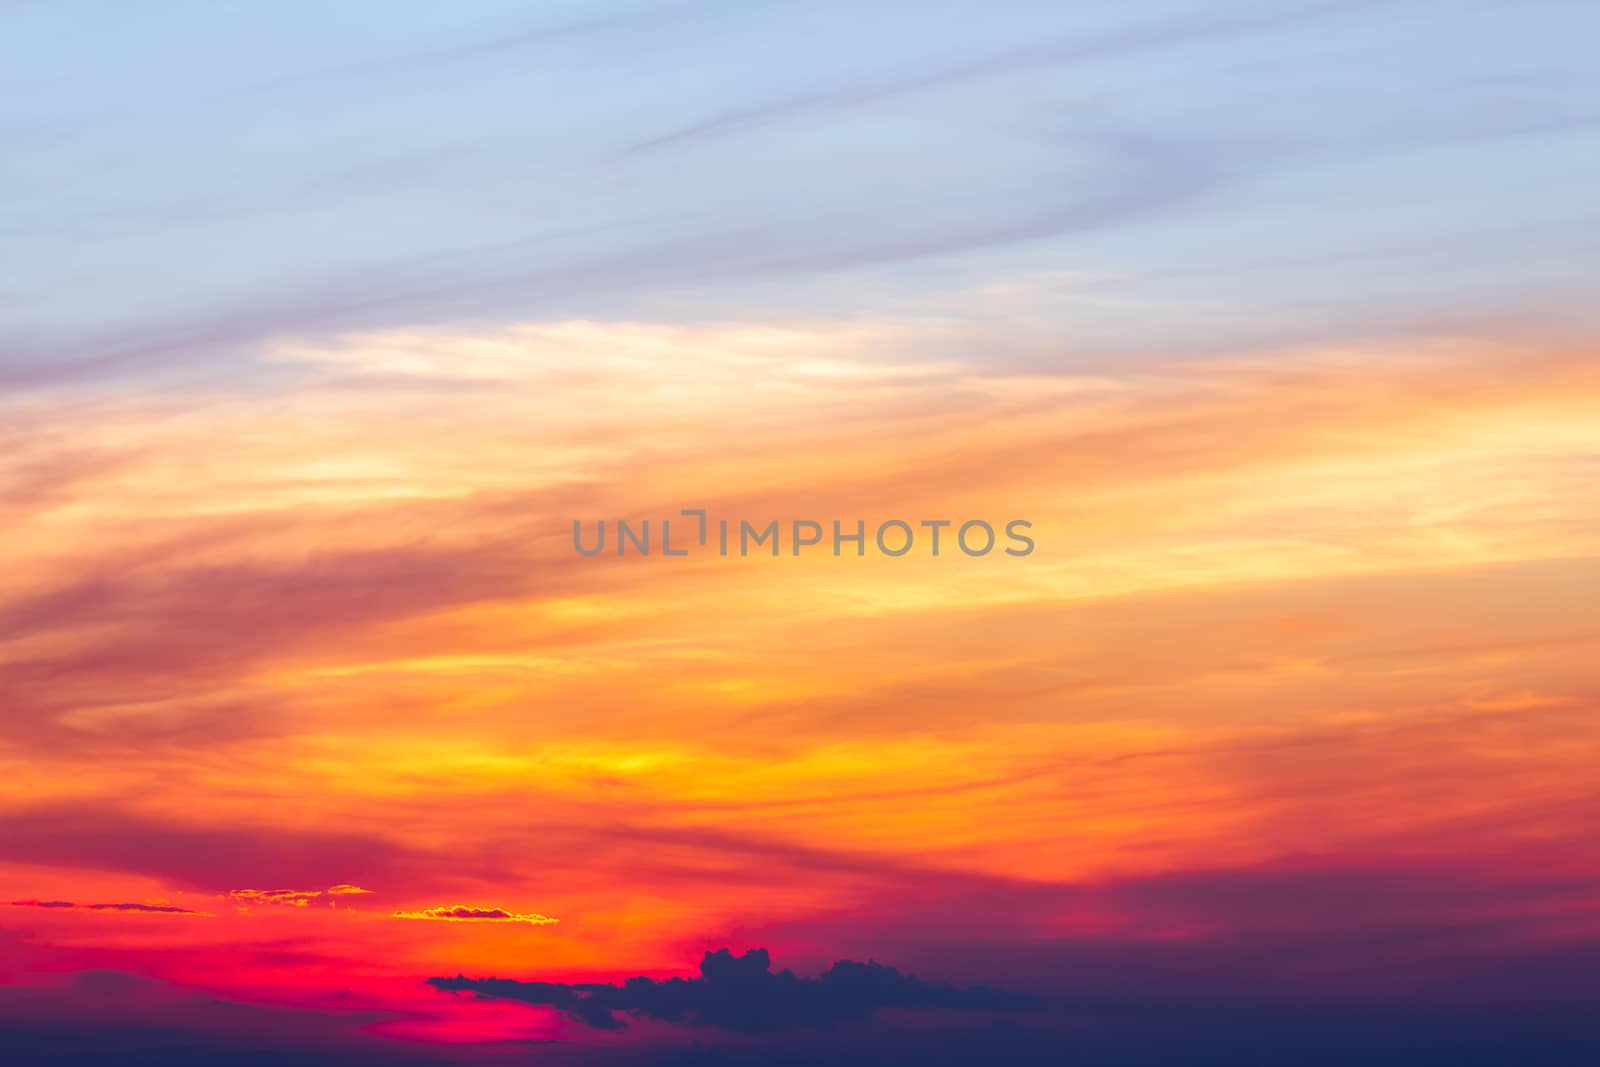 colorful dramatic sky with cloud at sunset
 by freedomnaruk